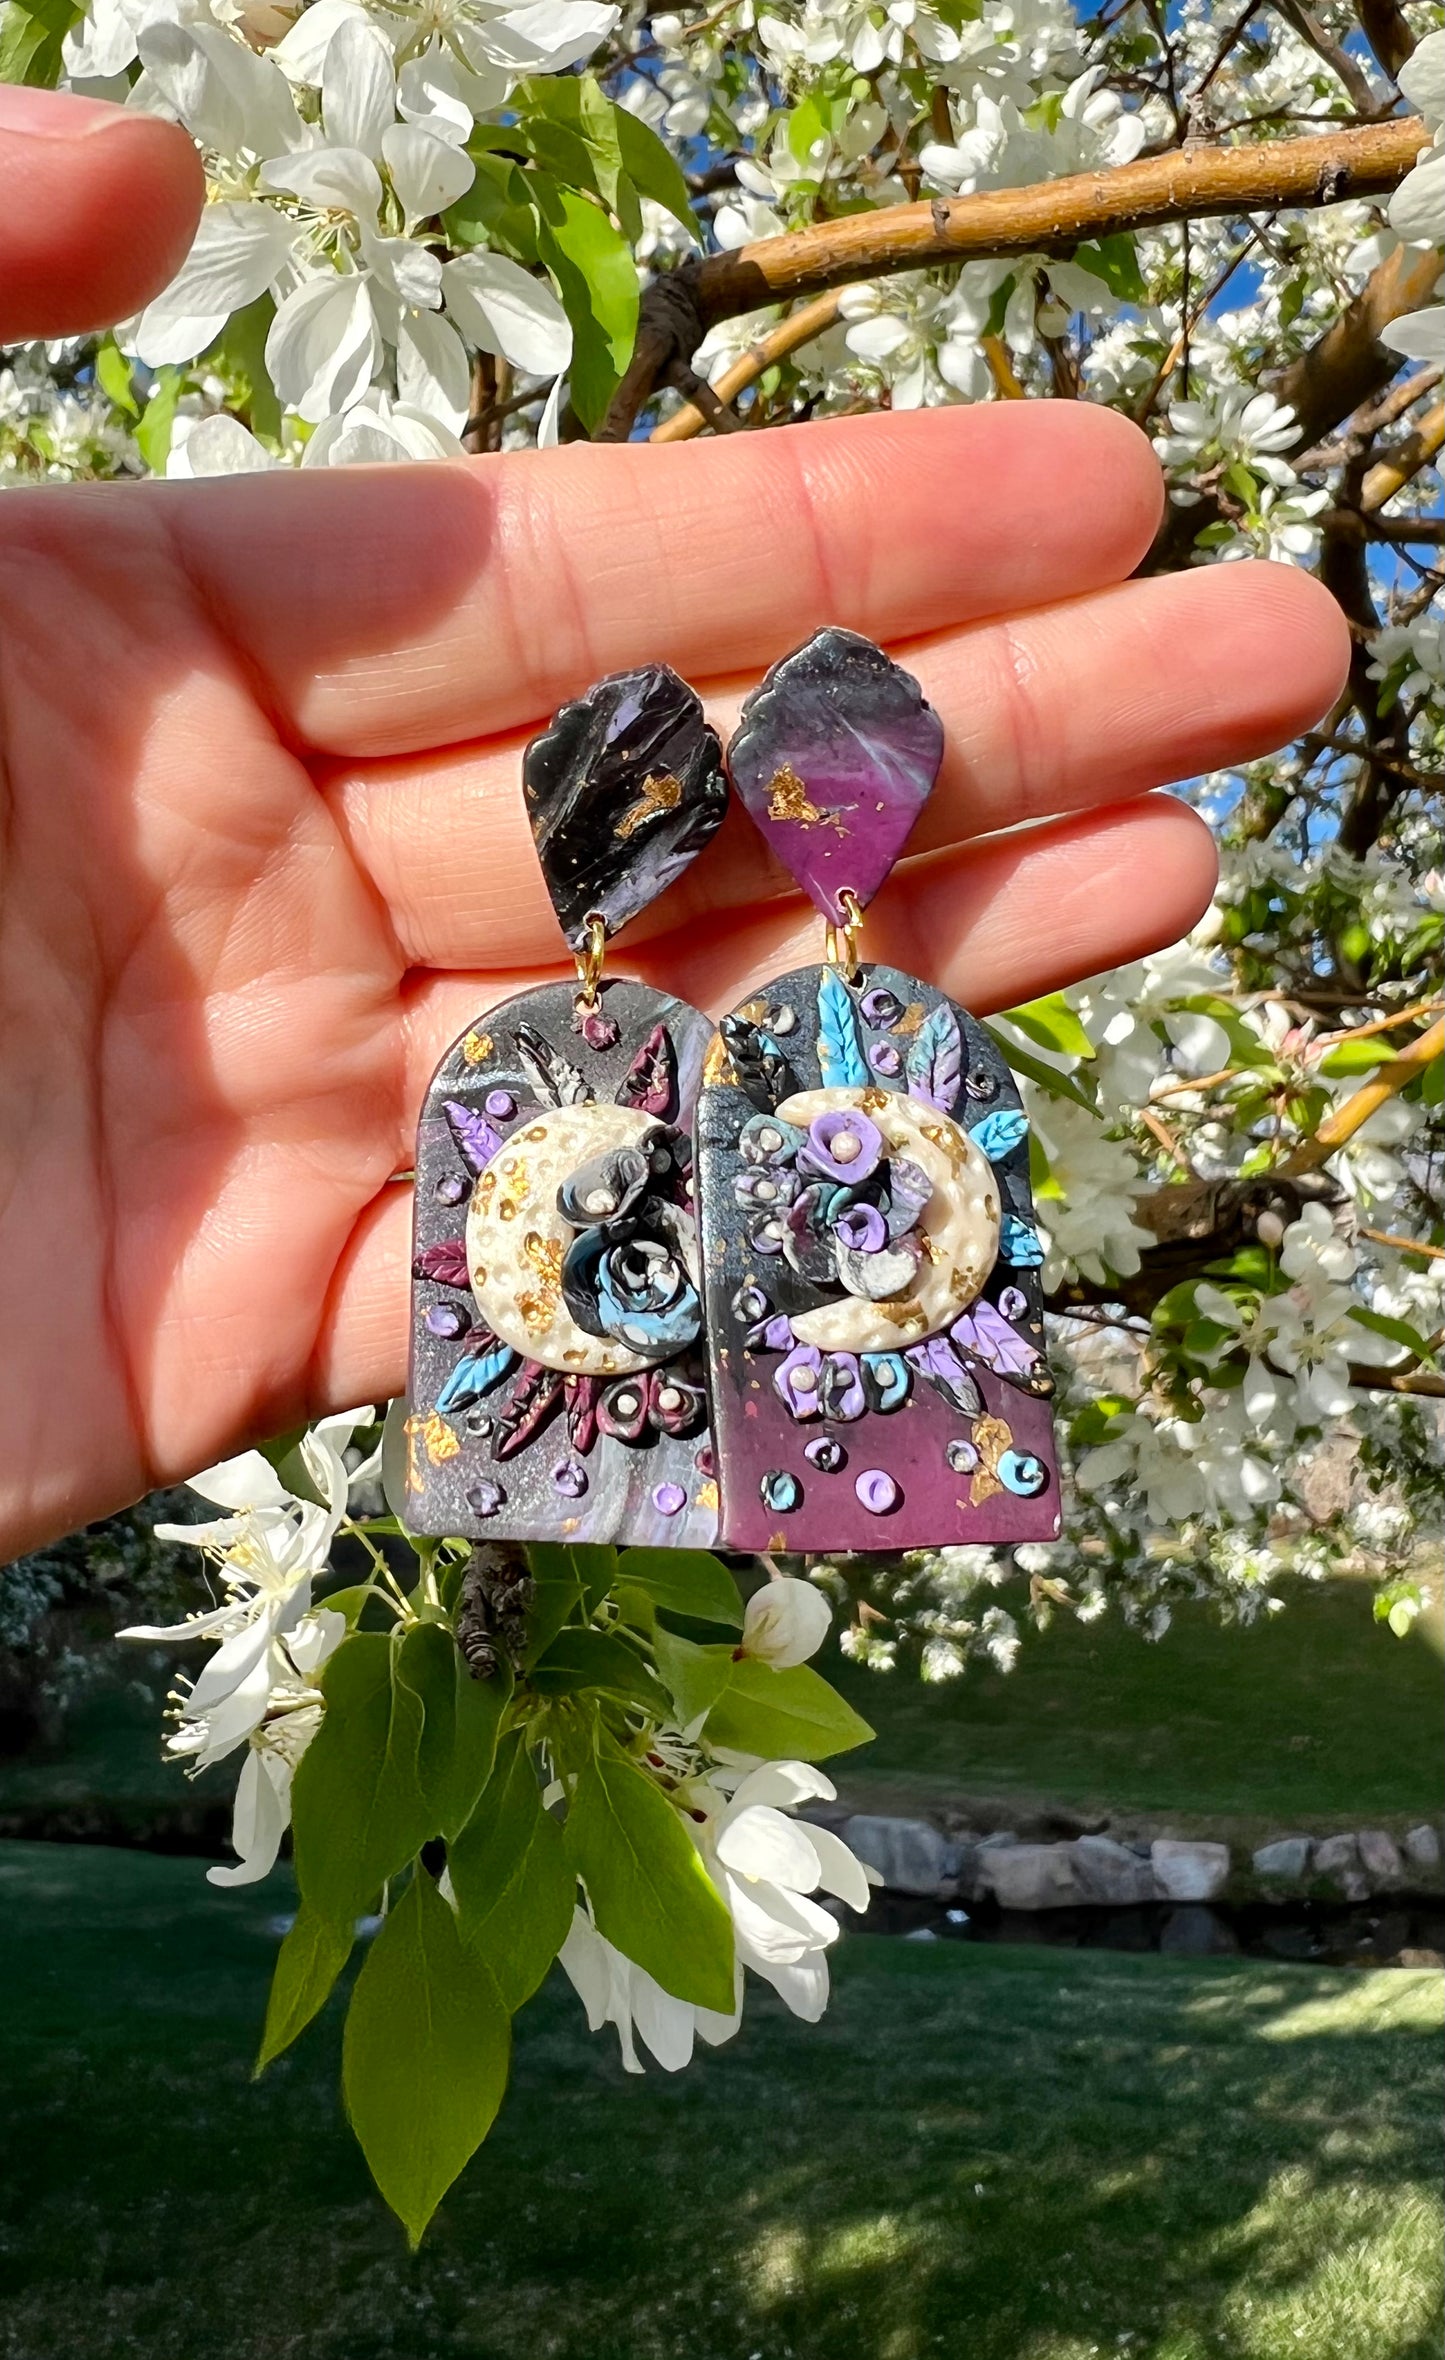 Embrace the beauty of May's Flower Moon with these unique earrings. Handcrafted with love, they capture the essence of wildflowers such as wild garlic, bluebells, and violets. Made from kato polymer clay, these earrings offer both elegance and hypoallergenic wear